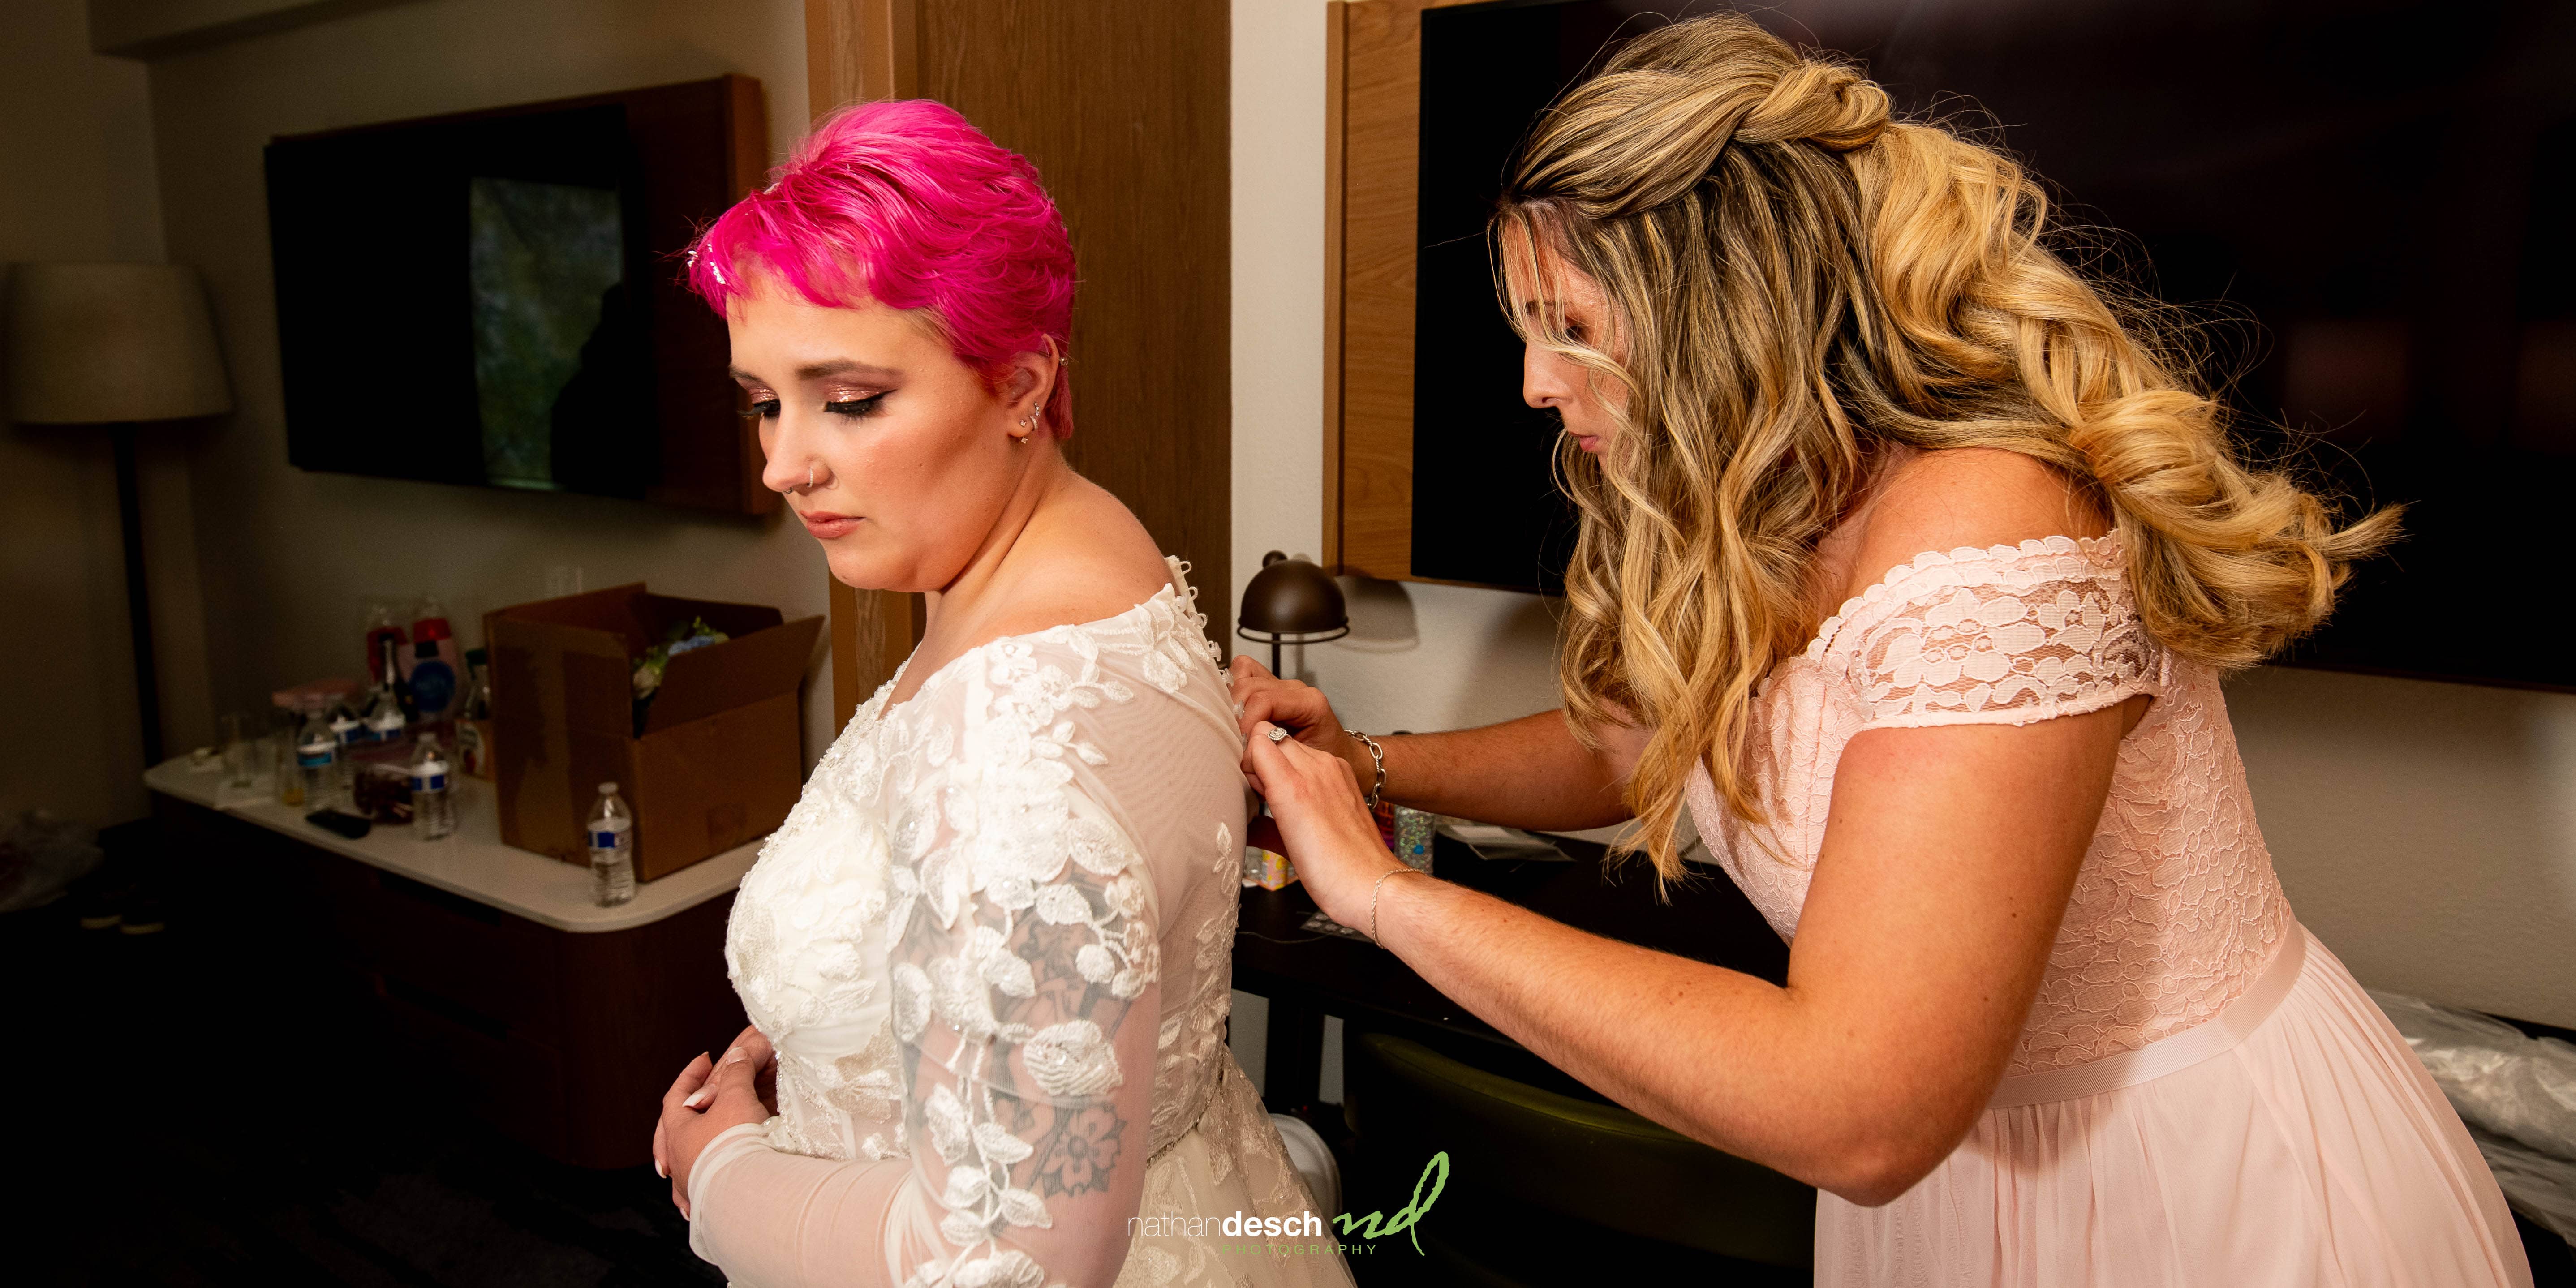 bride with pink hair getting ready